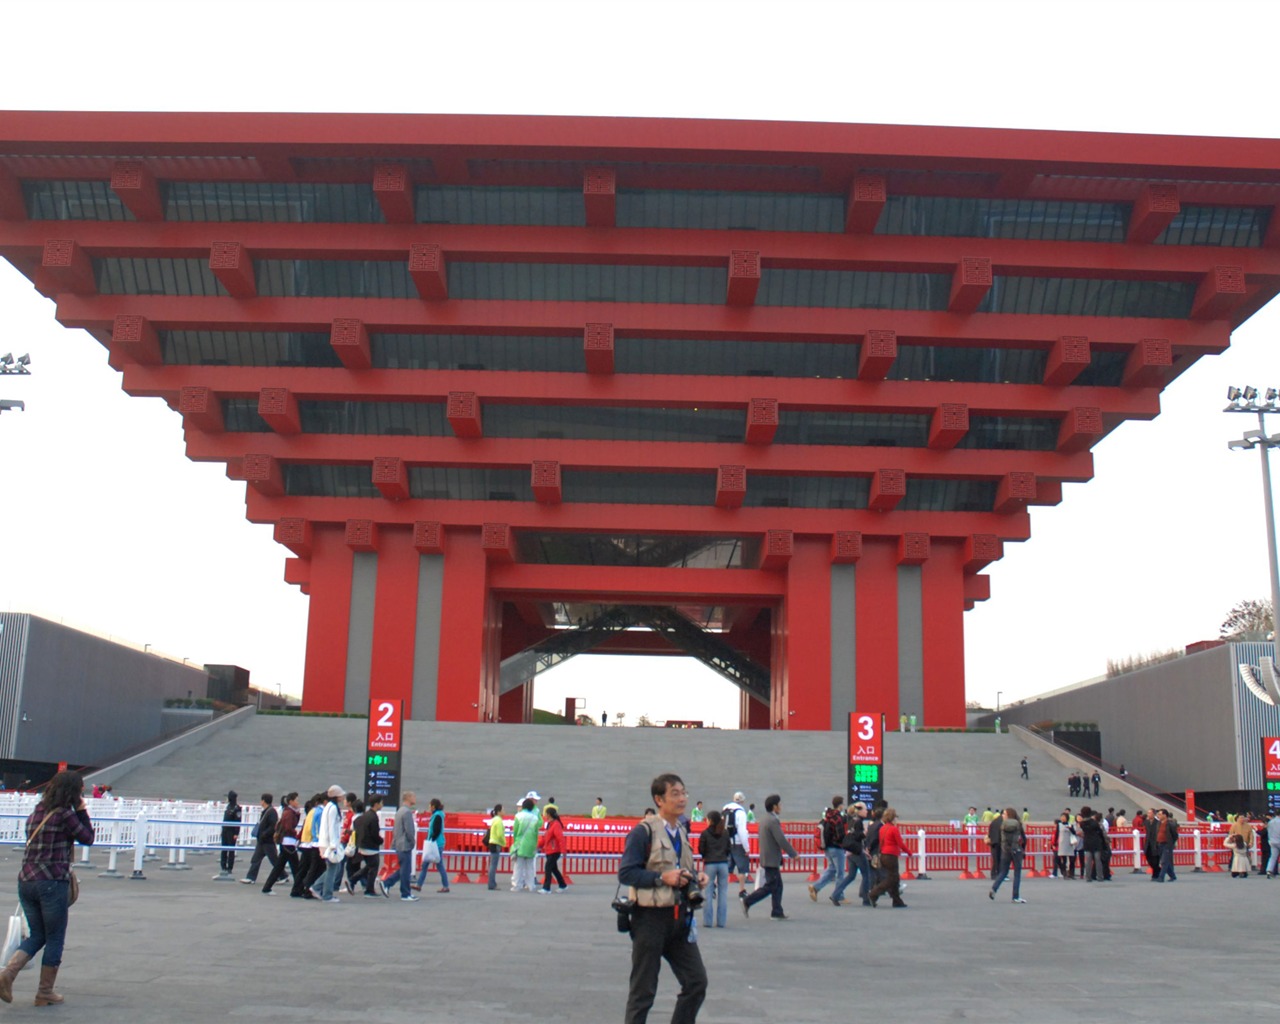 Commissioning of the 2010 Shanghai World Expo (studious works) #26 - 1280x1024